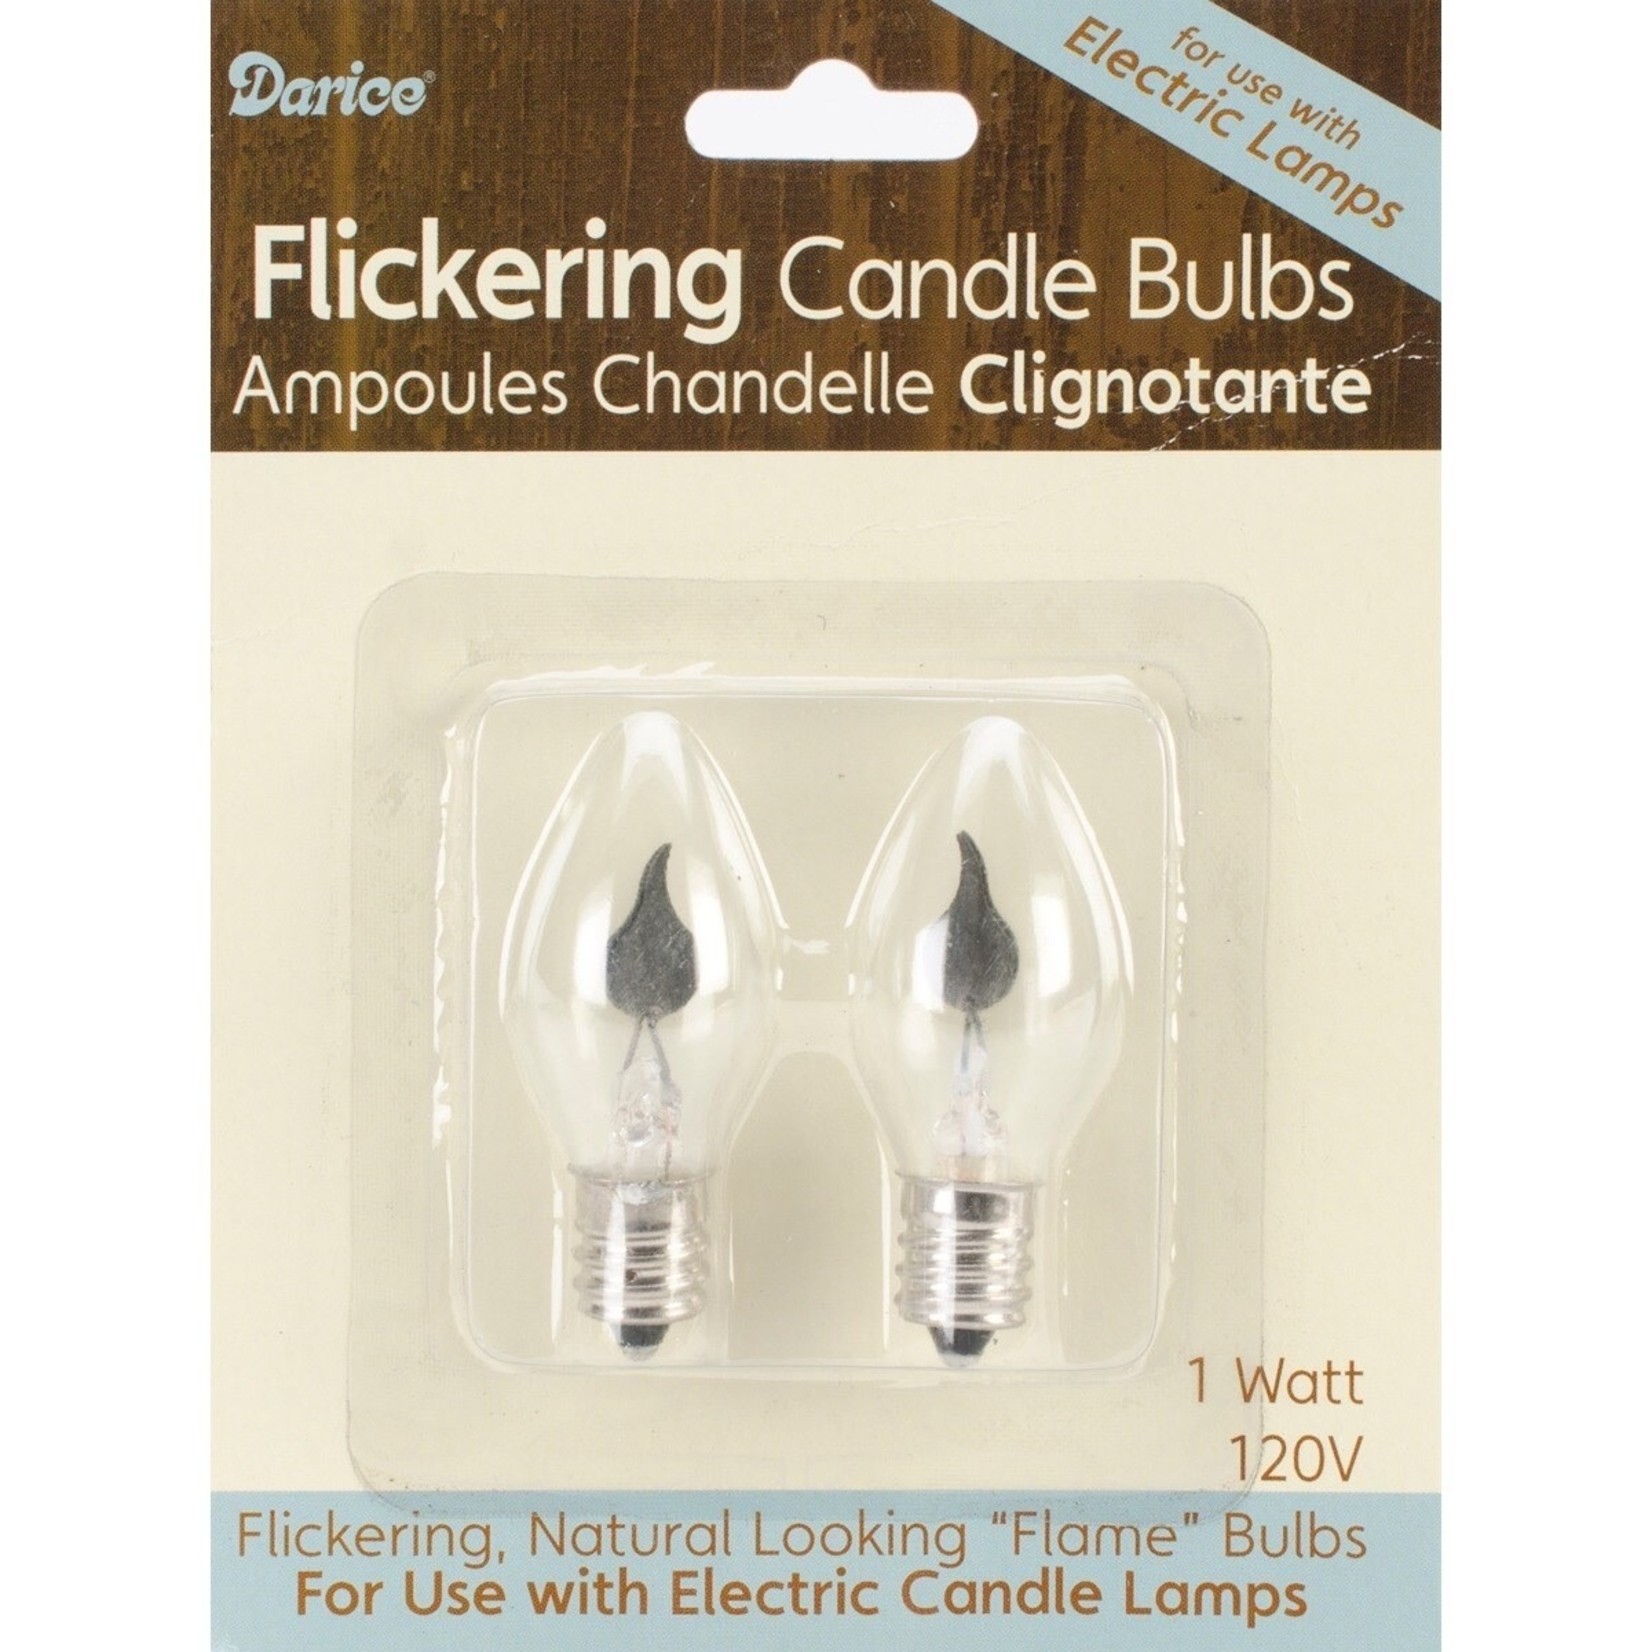 Darice Flickering Candle Bulbs, 2 Pack